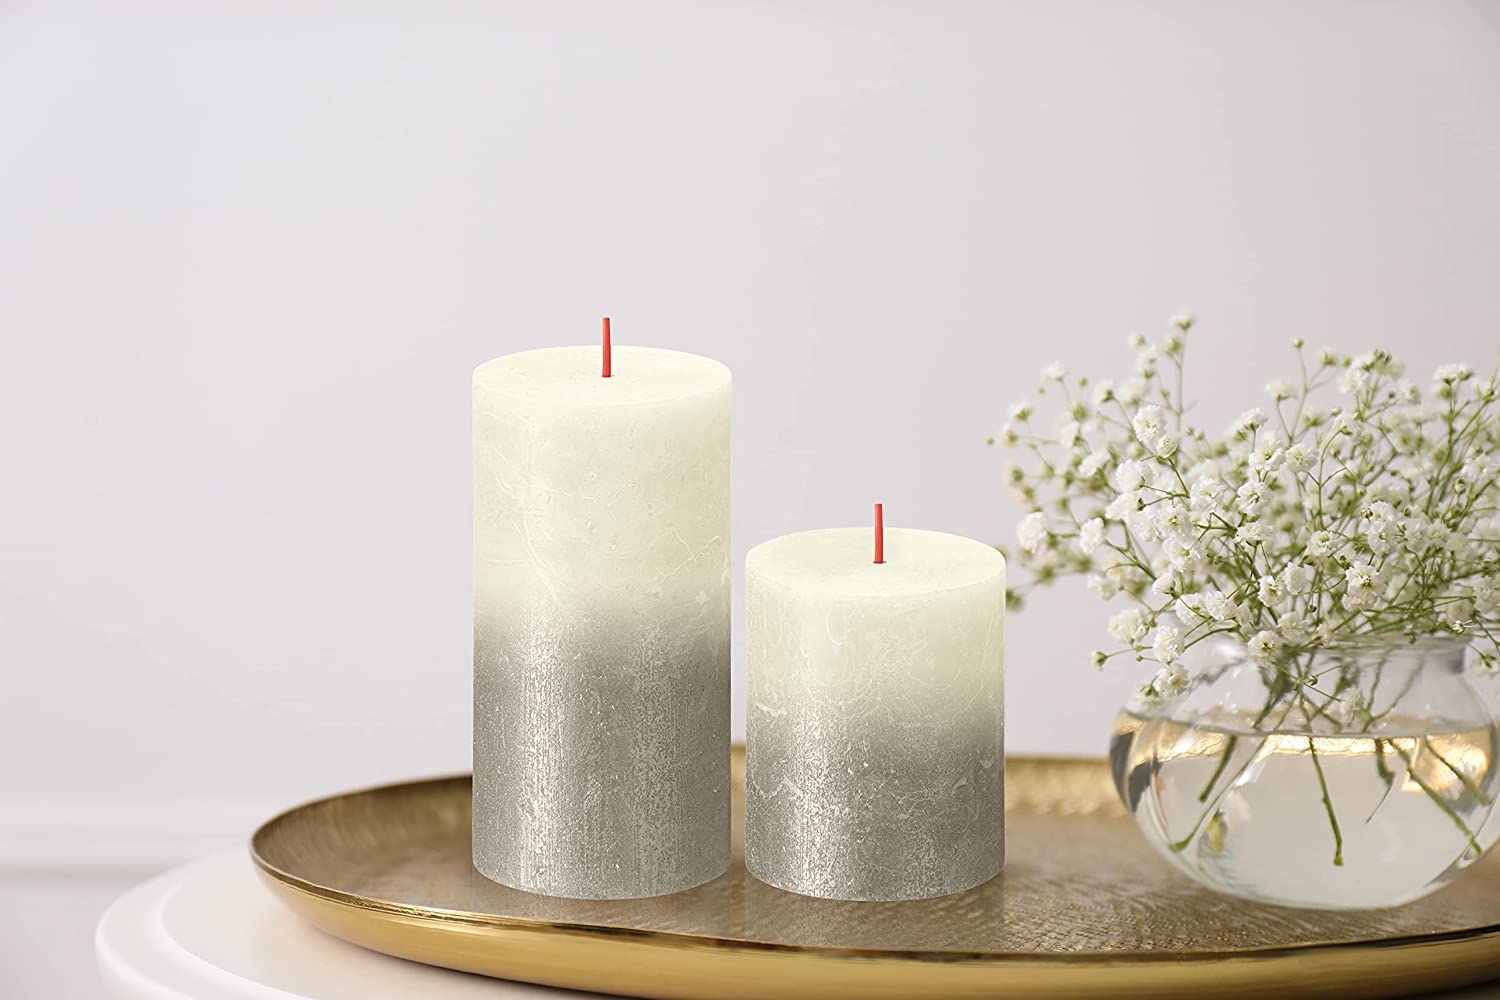 BOLSIUS 4 Pack Ivory/Silver Sunset Rustic Metallic Pillar Candles - 2.75 X 3.25 Inches - Fine European Quality - Natural Eco-Friendly Plant-Based Wax - Unscented Dripless Smokeless 35 Hour Candles  - Like New